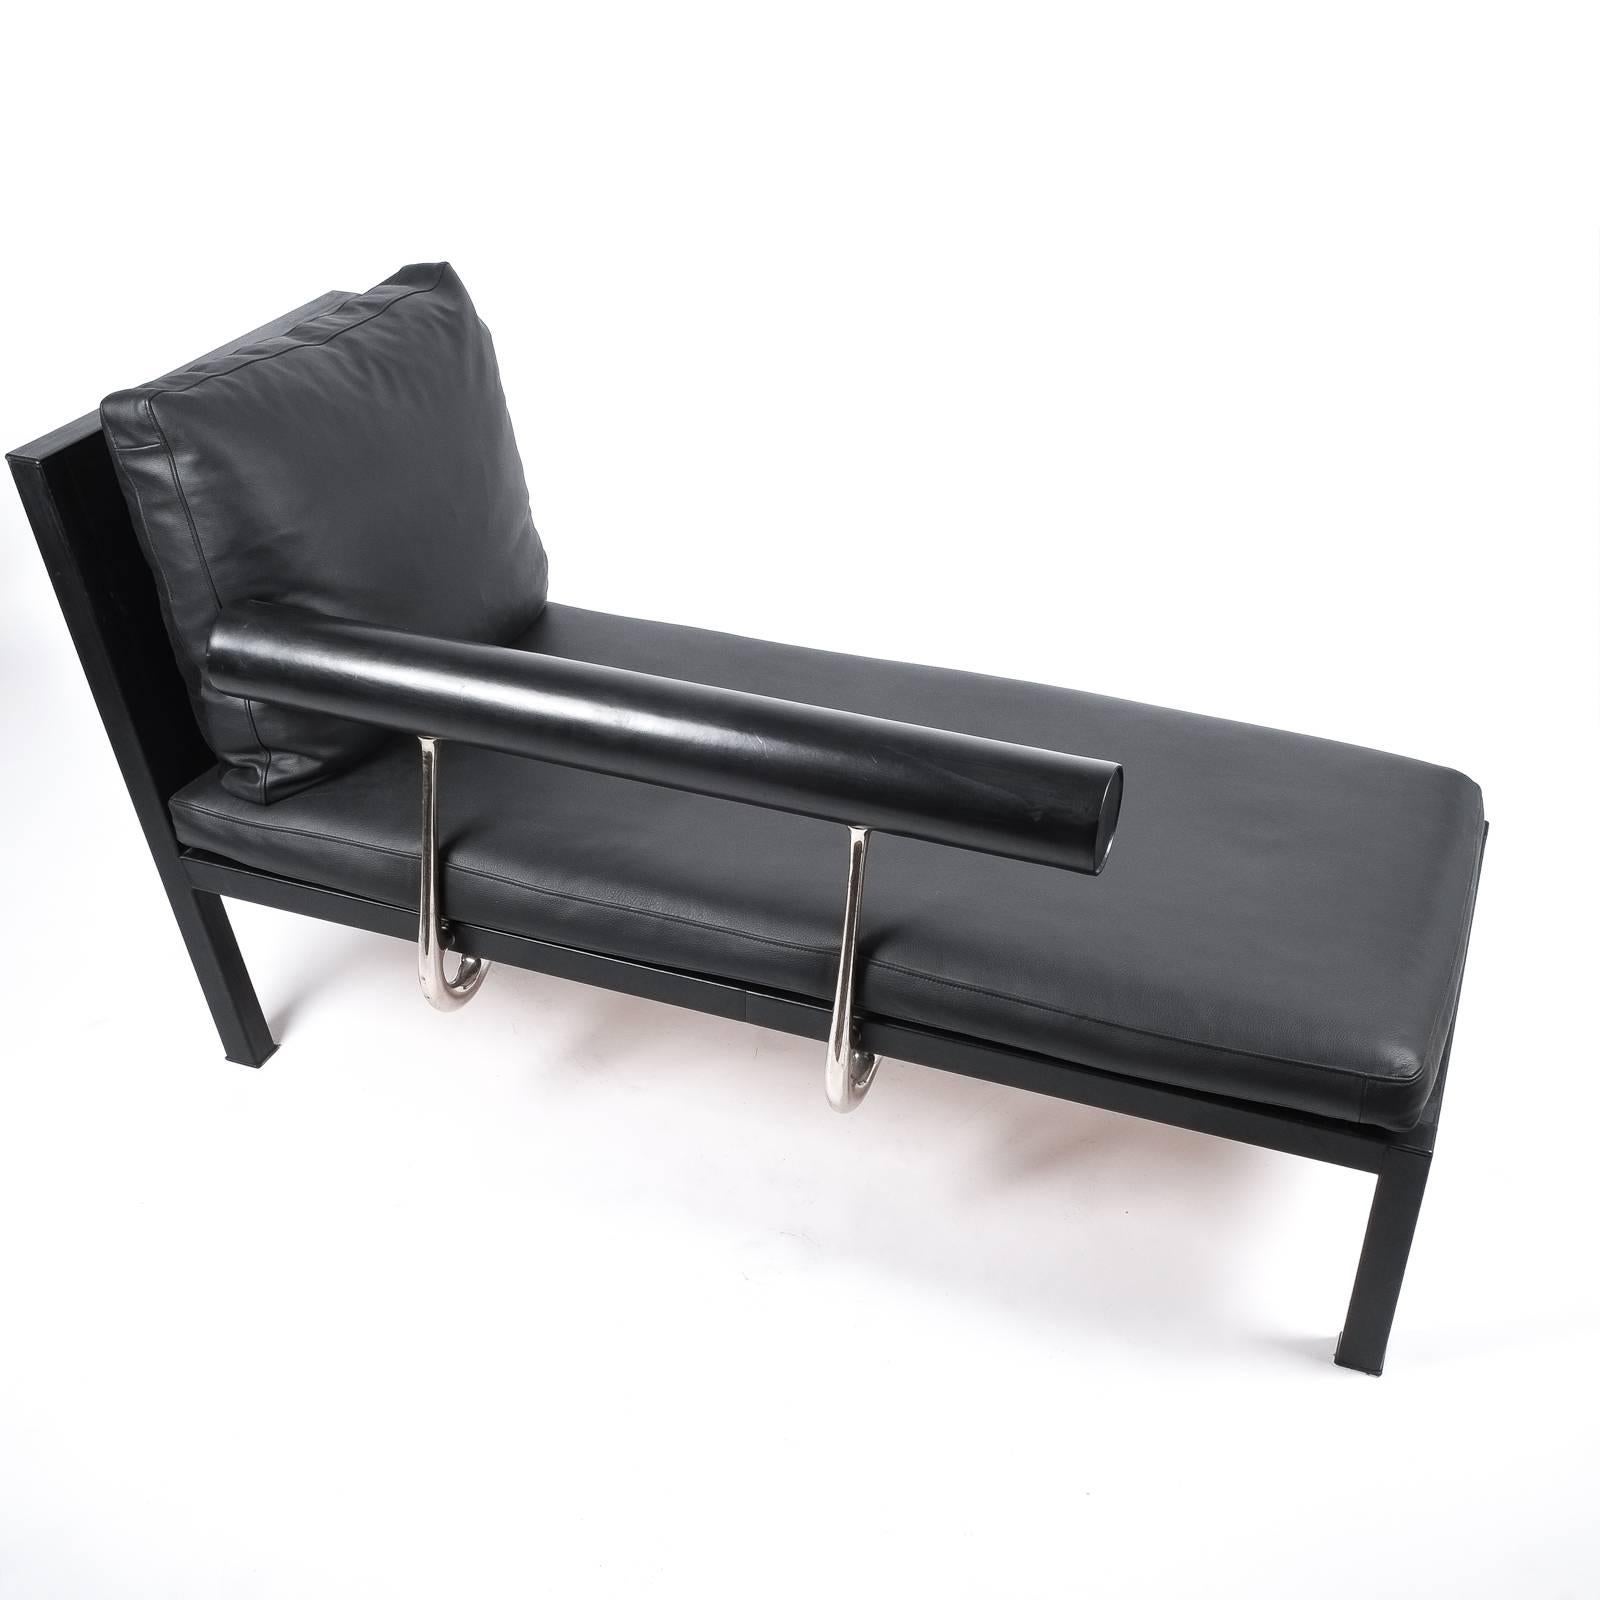 Leather Chaise Lounge Black Sofa Baisity by Antonio Citterio for B&B Italy, 1980 For Sale 7